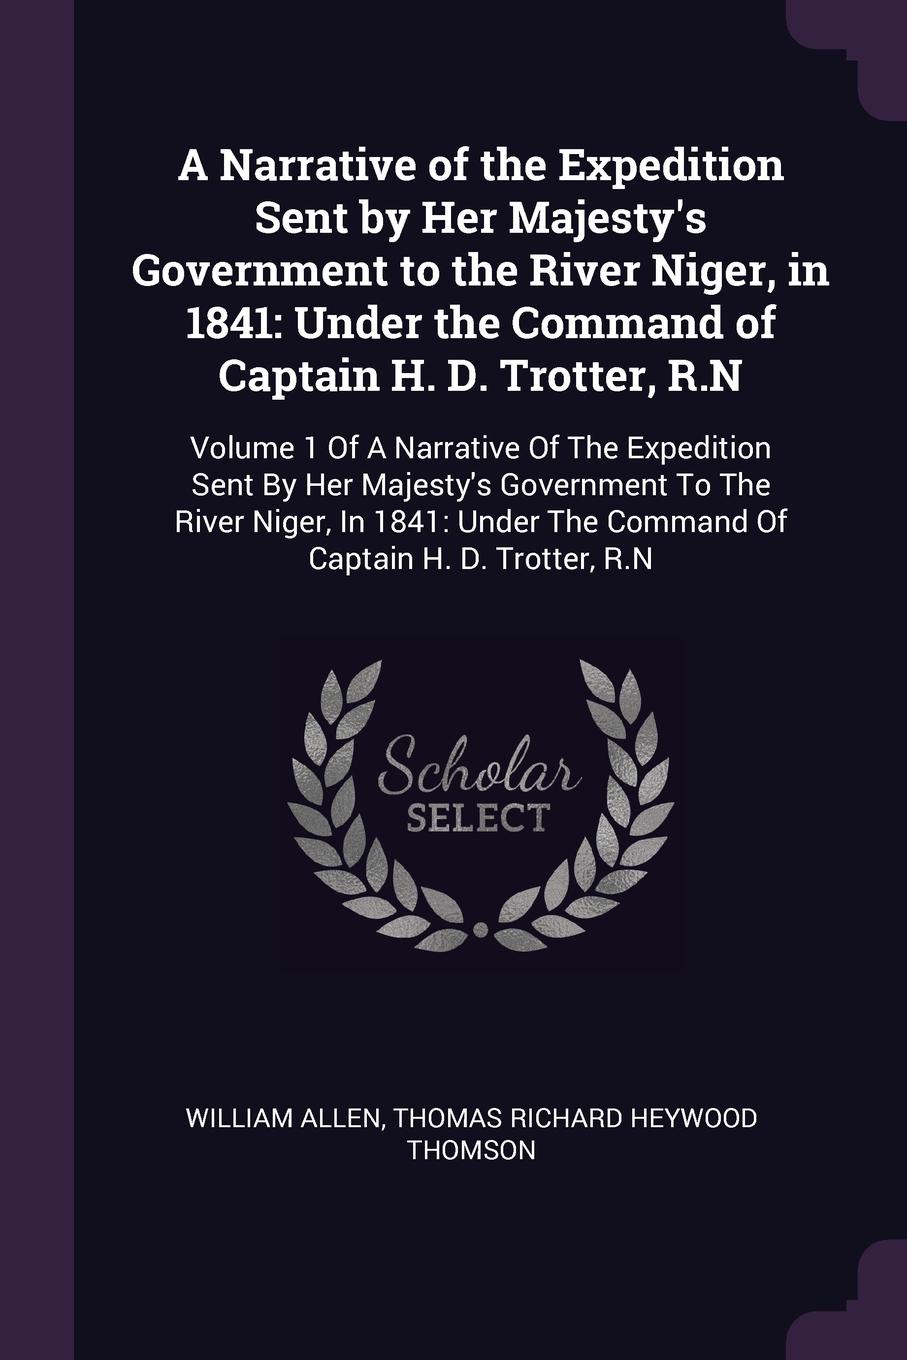 A Narrative of the Expedition Sent by Her Majesty`s Government to the River Niger, in 1841. Under the Command of Captain H. D. Trotter, R.N: Volume 1 Of A Narrative Of The Expedition Sent By Her Majesty`s Government To The River Niger, In 1841: Un...